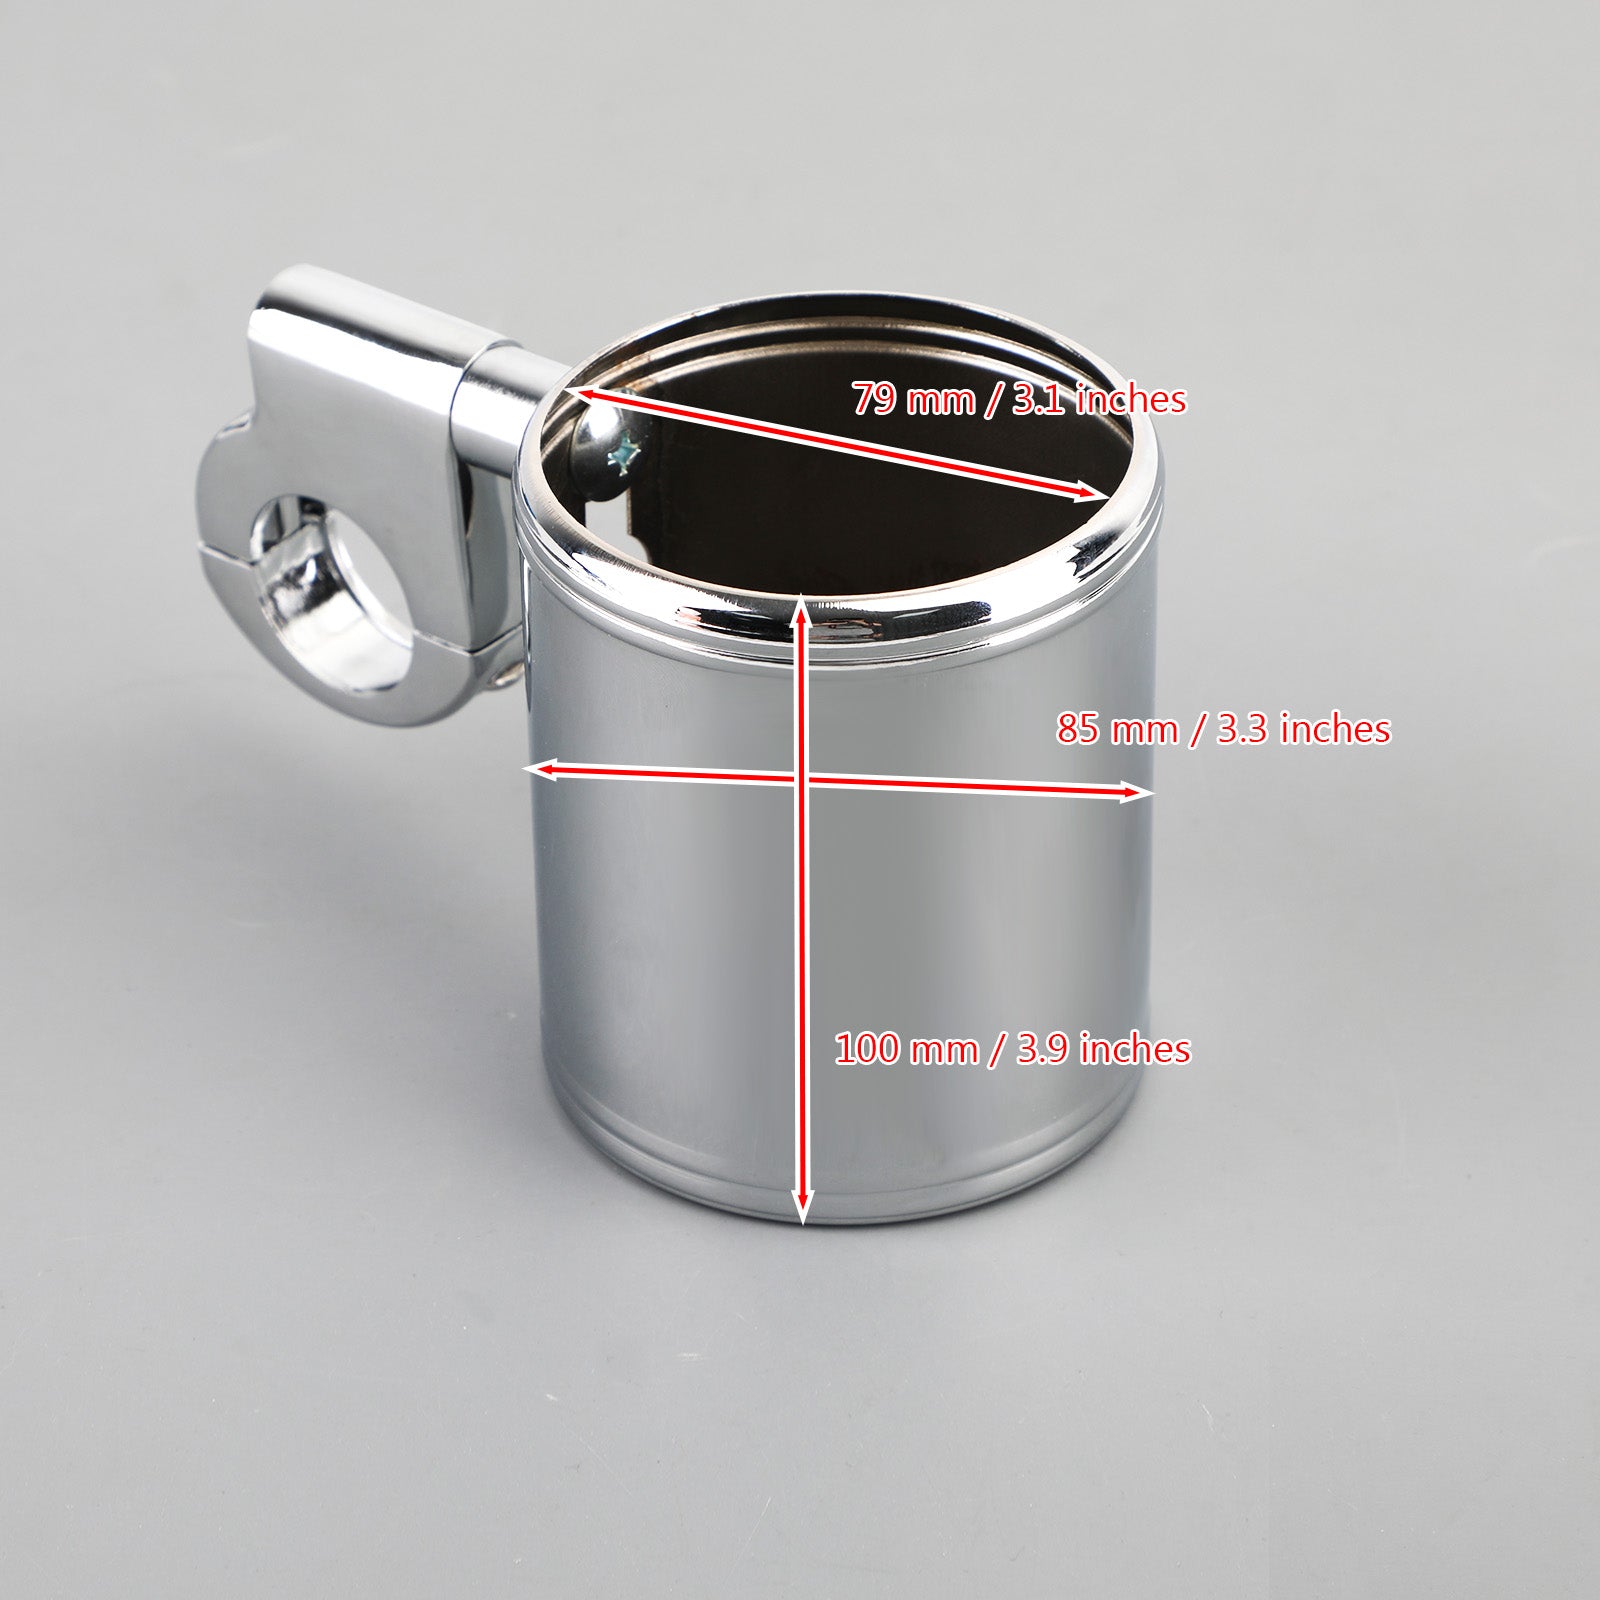 ATV Chrome Cup Holder Fit for 7/8inches 1inches 1-1/4inches Handlebar Universal